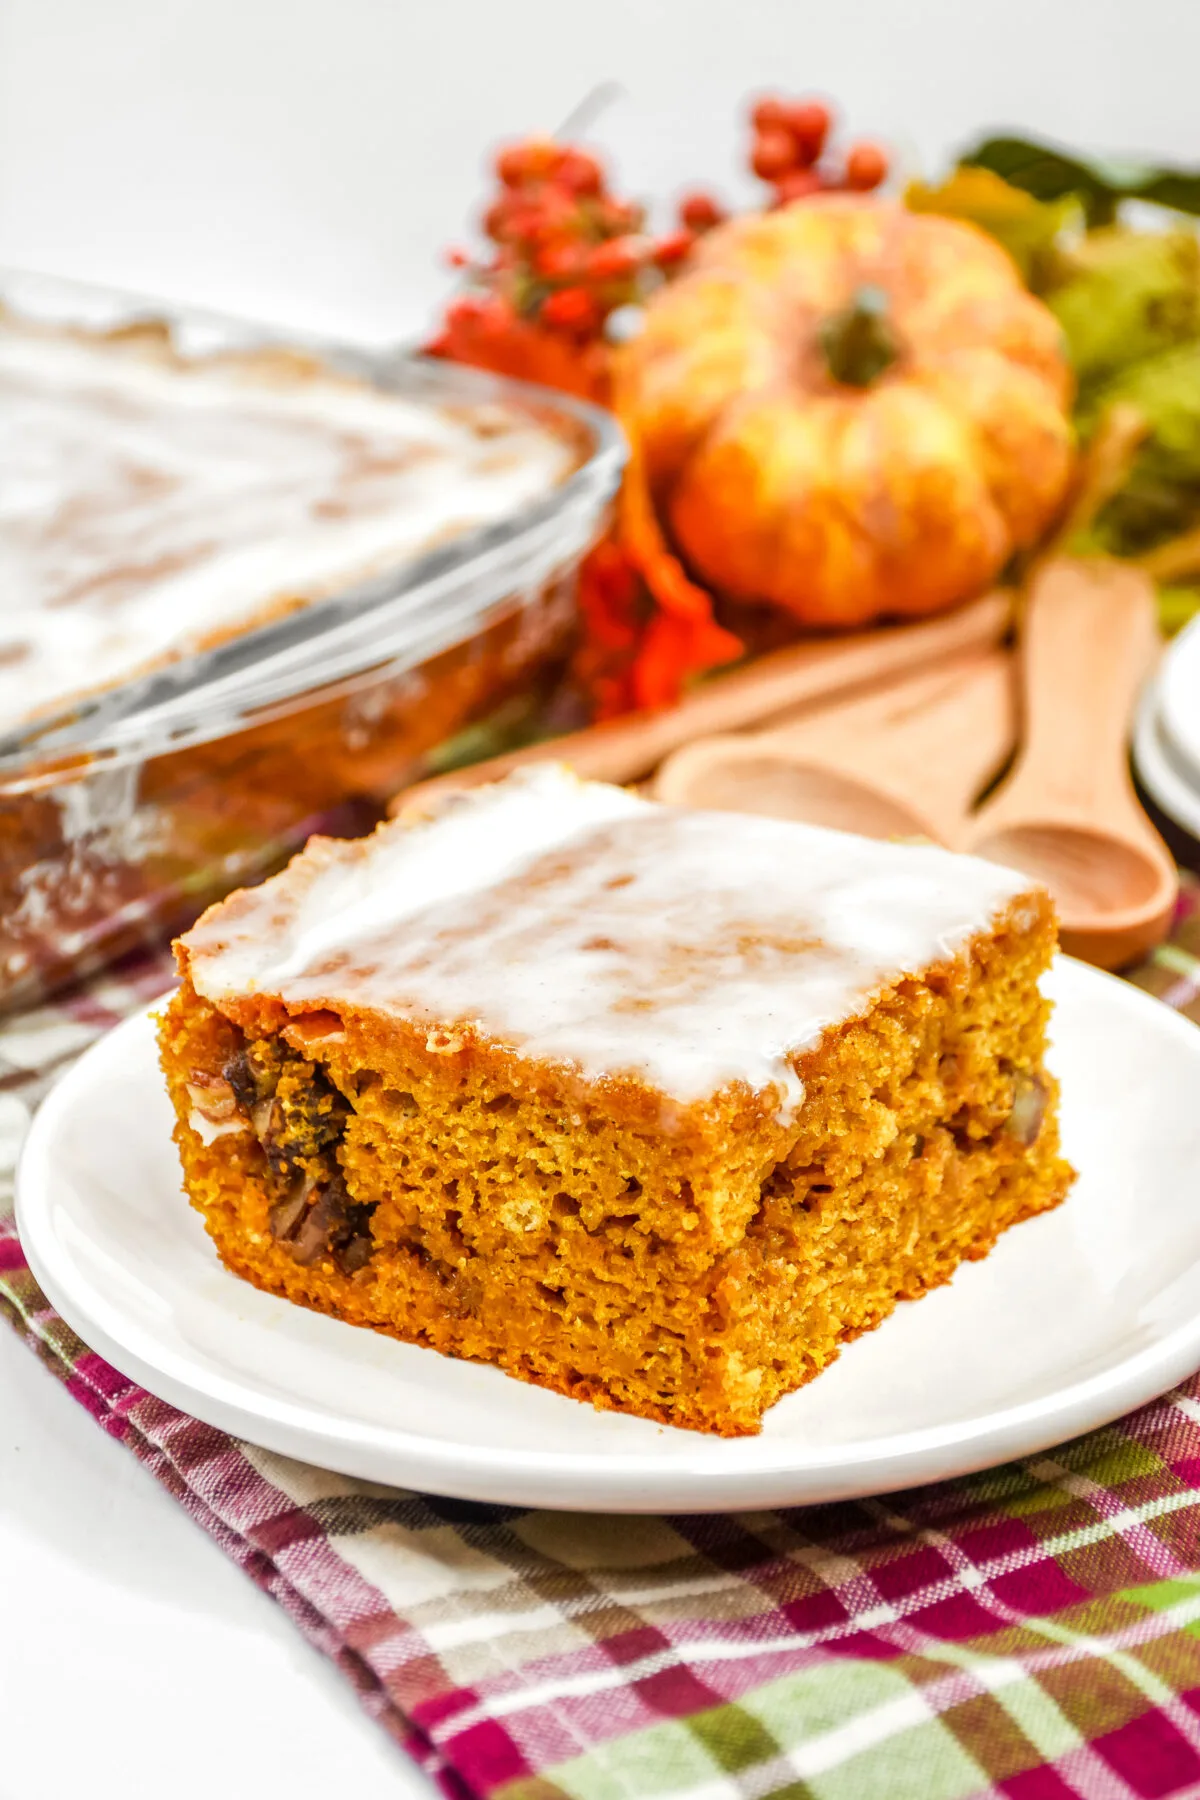 This pumpkin honey bun cake recipe is not only sweet and delicious, but also super moist. It may be hard to share this delicious fall treat!